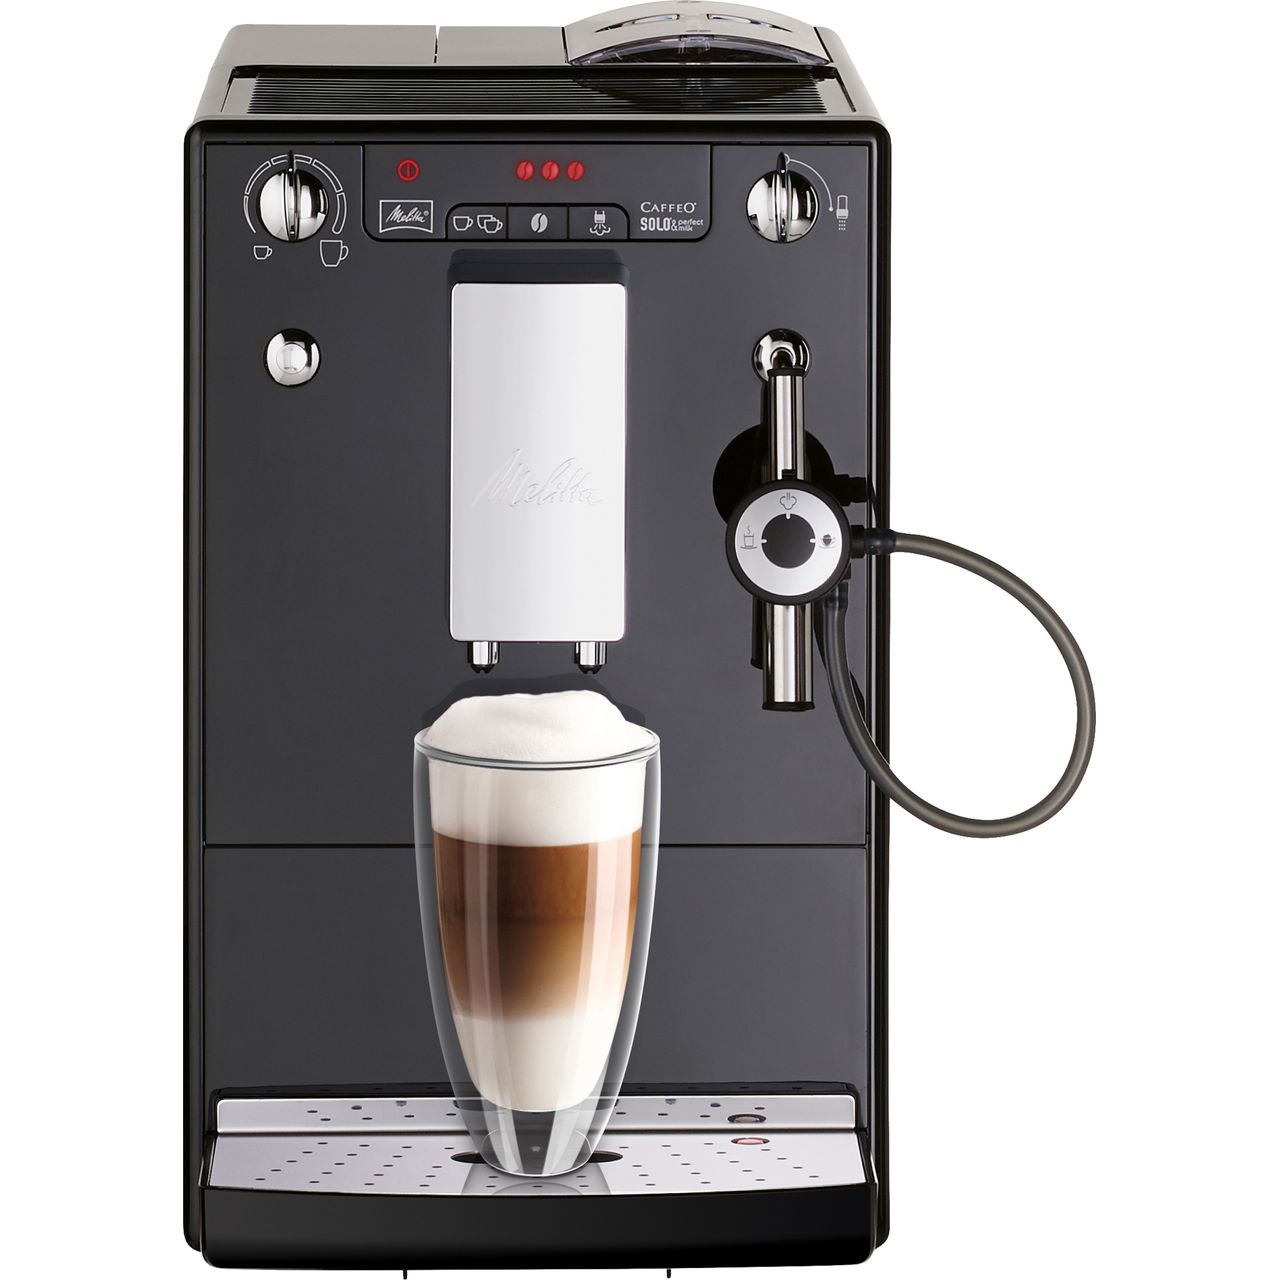 Melitta Caffeo Solo & Perfect Milk 6679163 Bean to Cup Coffee Machine Review